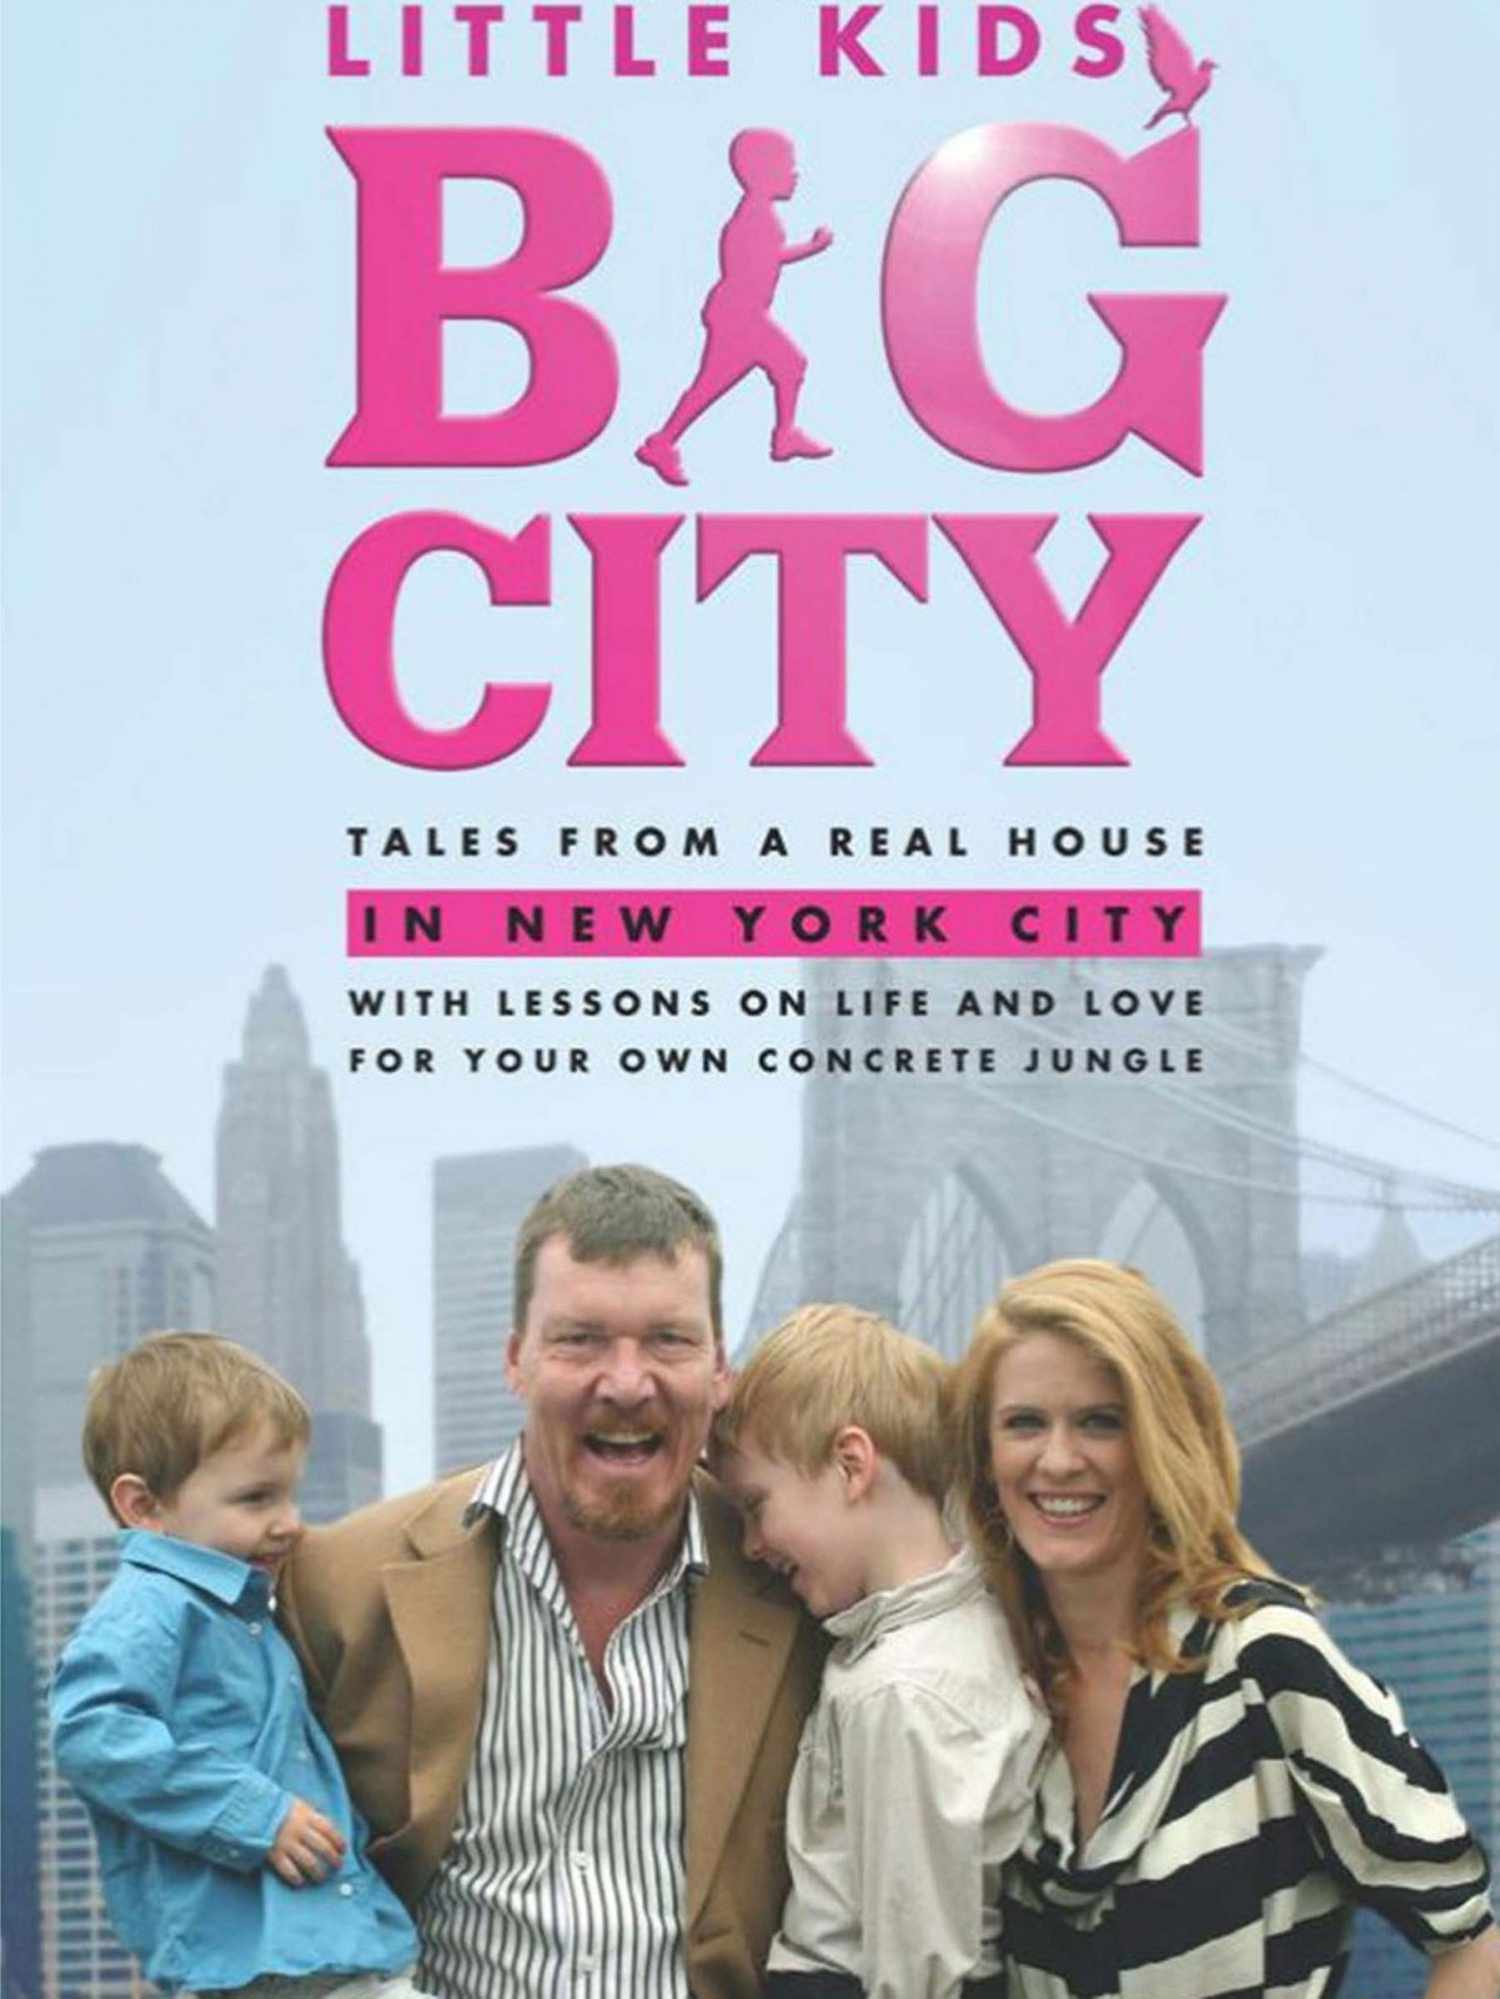 Little Kids, Big City: Tales From a Real House in New York City (With Lessons on Life and Love for Your Own Concrete Jungle), by Alex McCord and Simon van Kempen